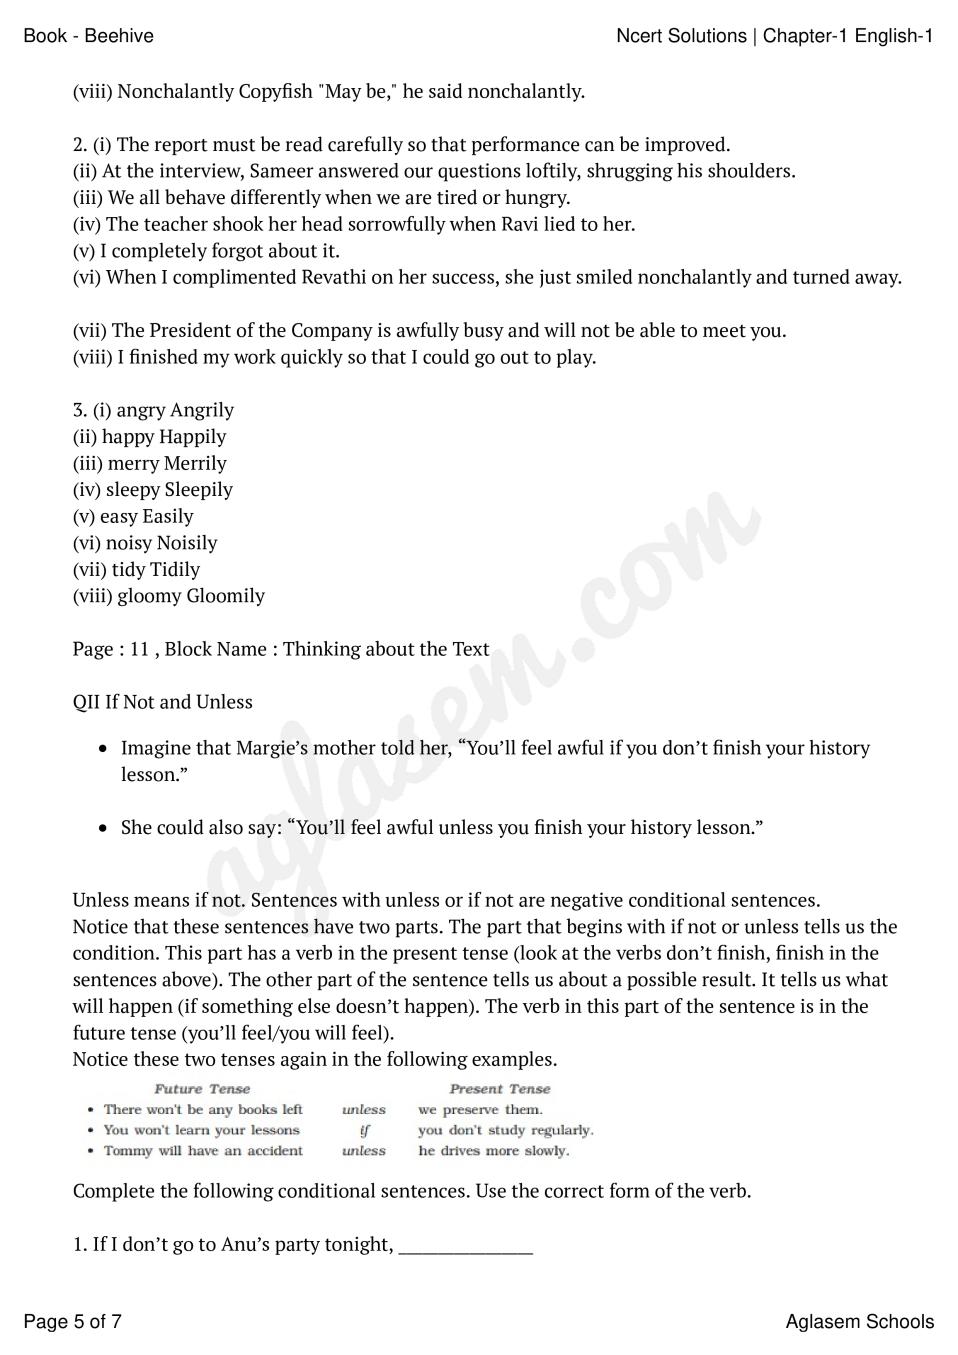 Ncert Solutions Class 9 English Moments Chapter 3 Iswaran The Storyteller Ncert Solutions 